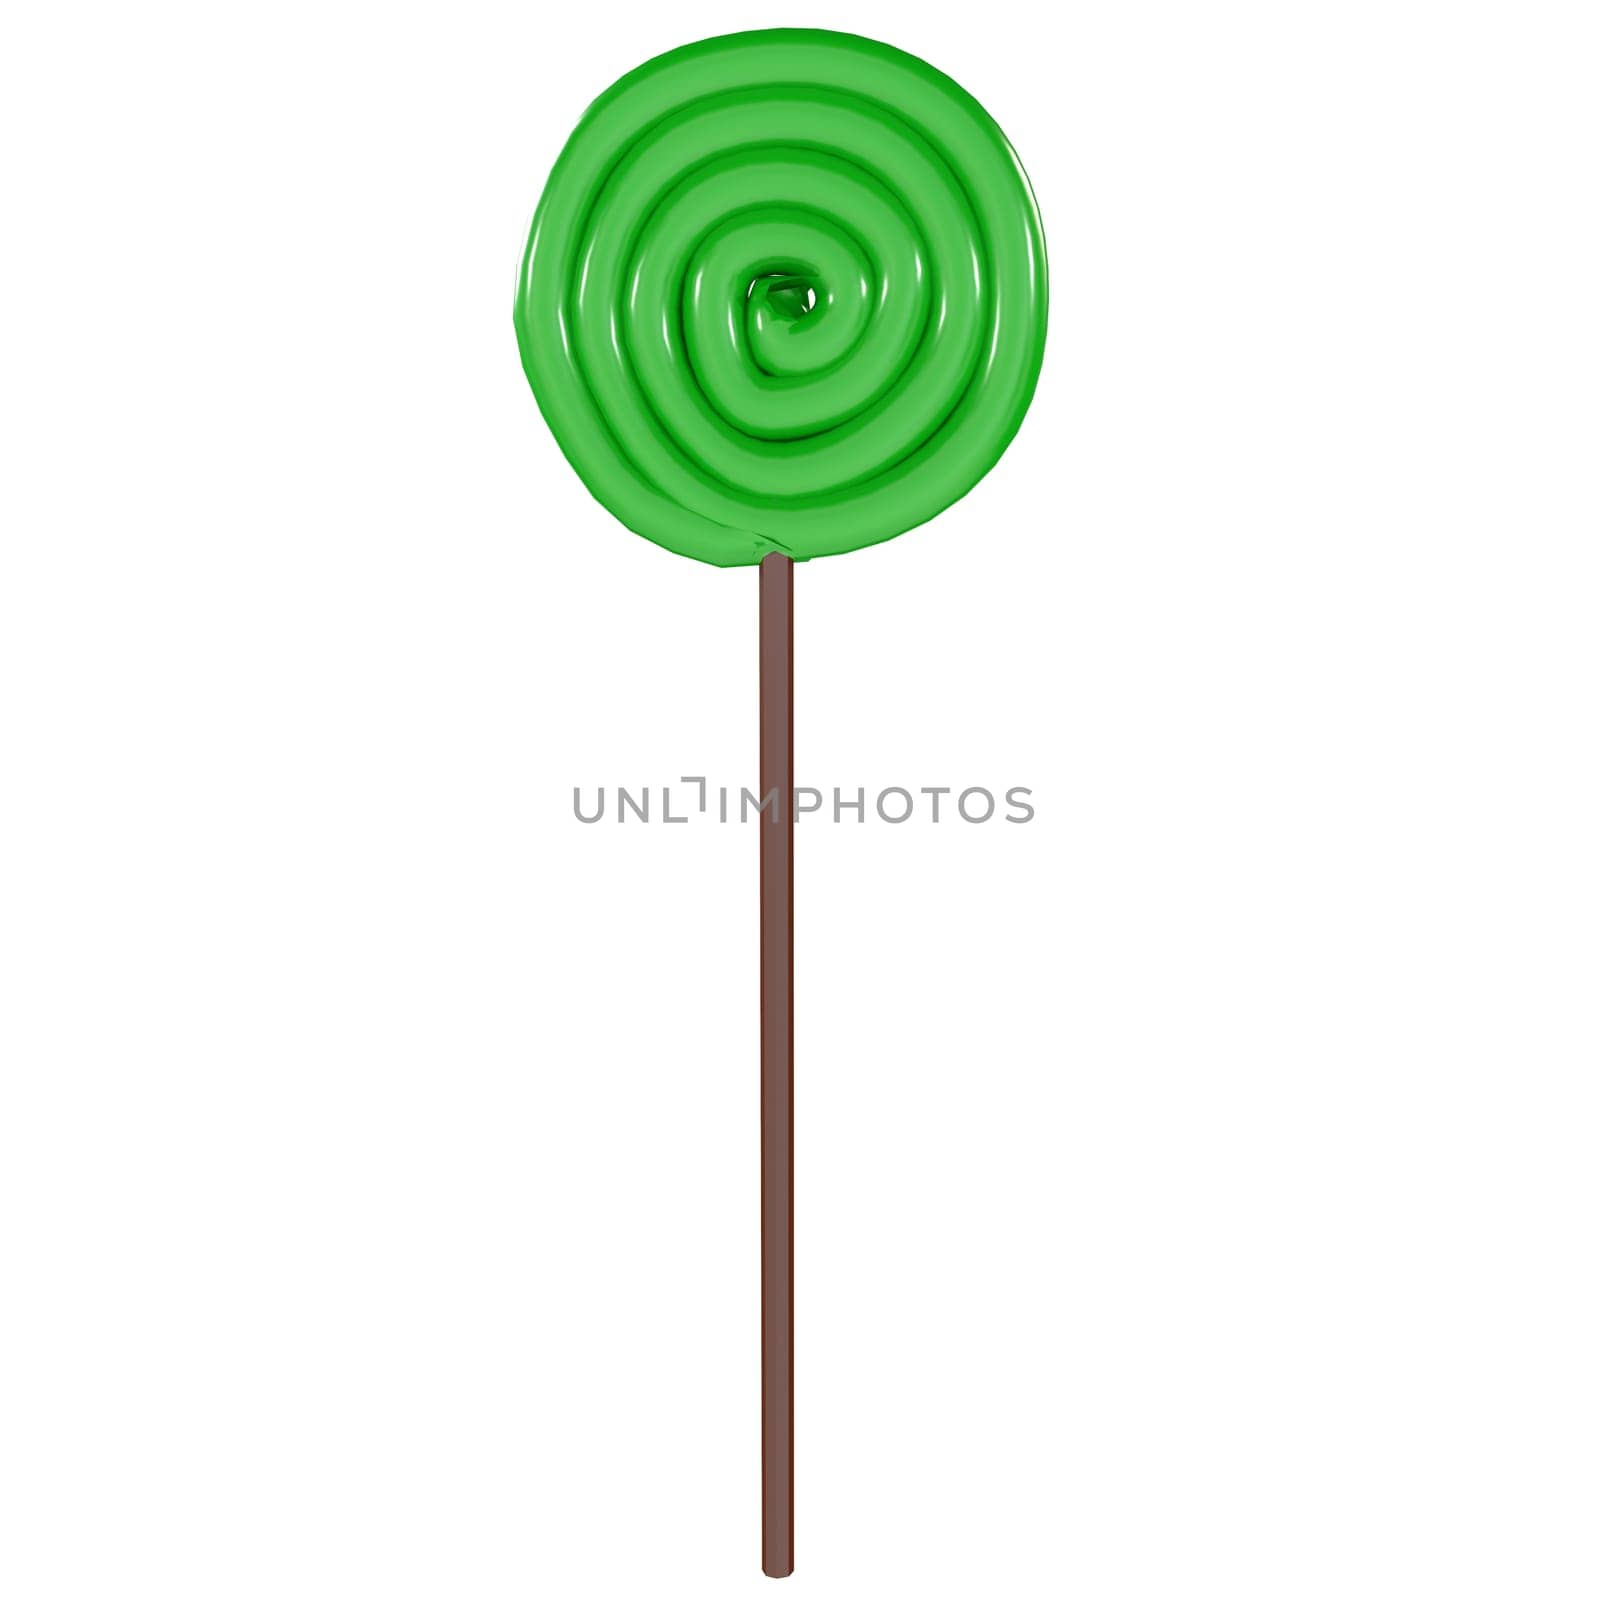 Green Lollypop isolated on white background. High quality 3d illustration